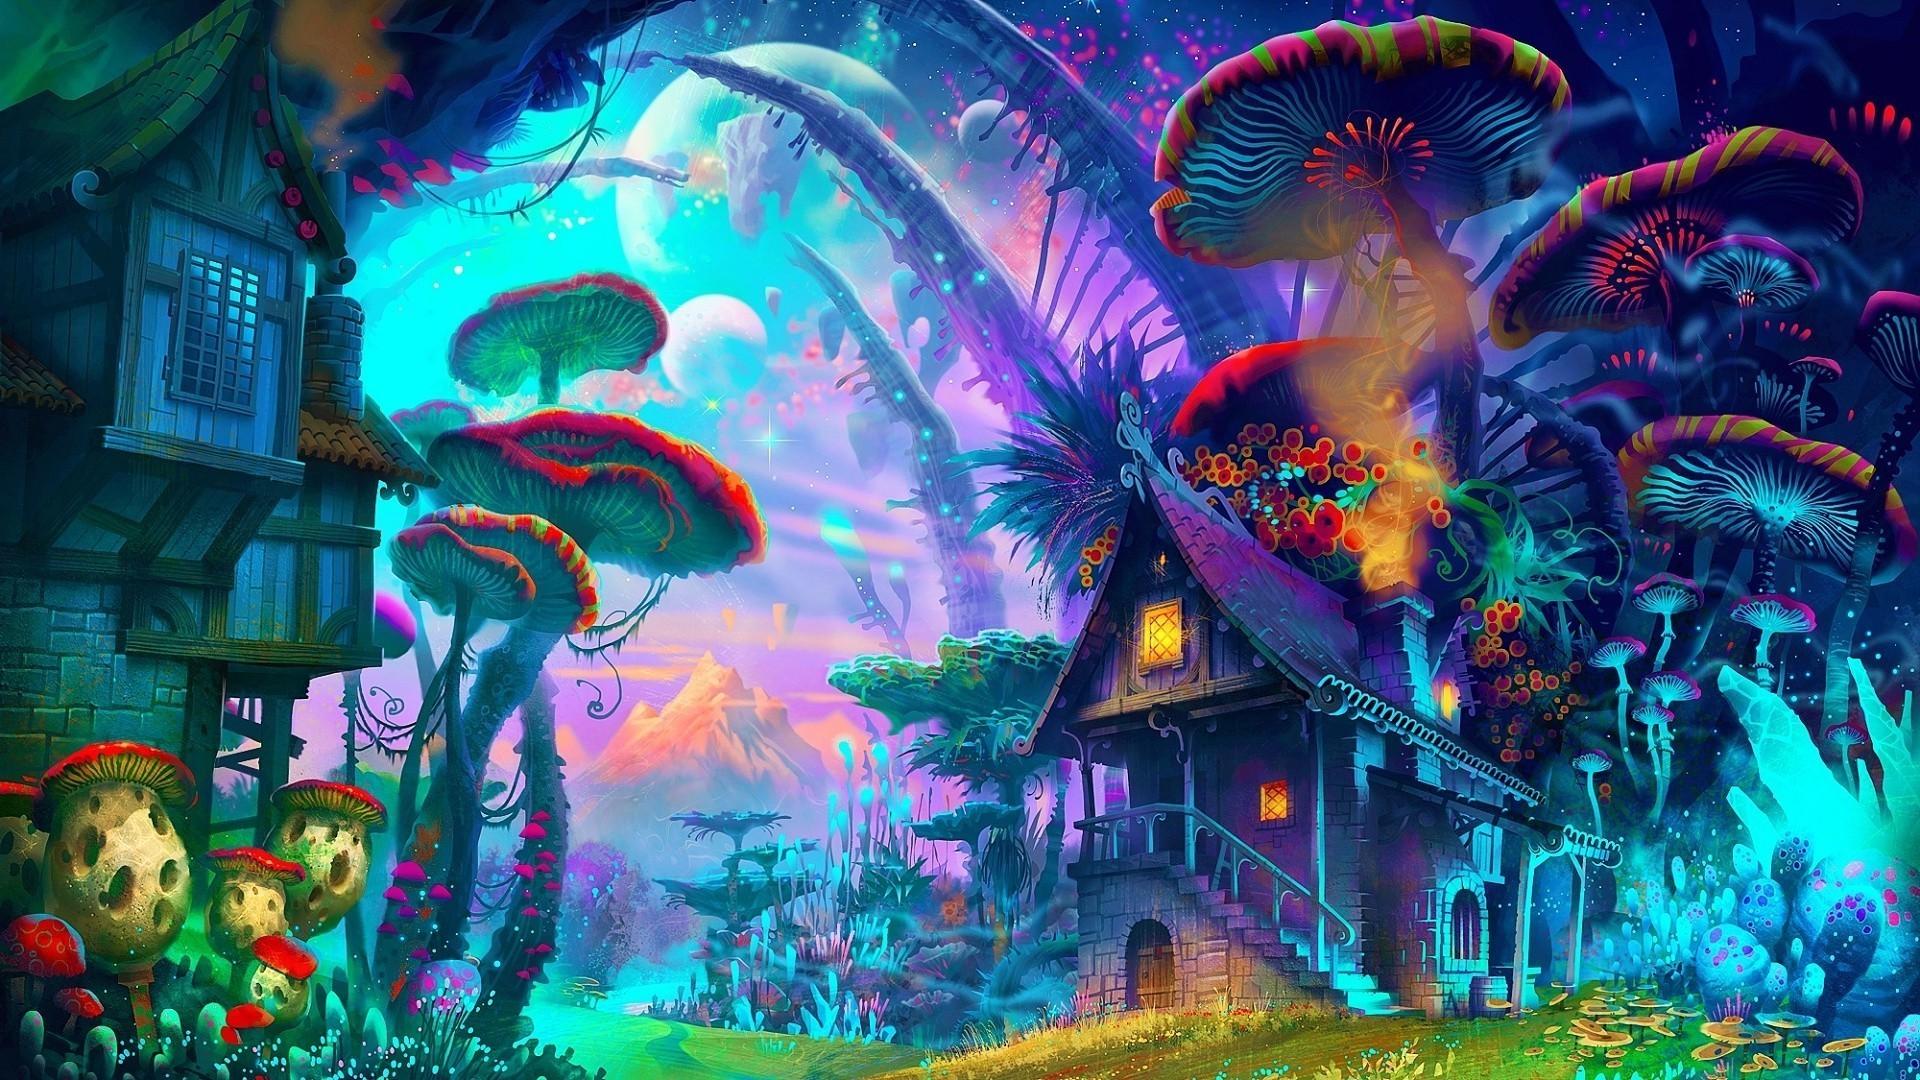 Mary Jane Weed Wallpaper Trippy And Morty Mushroom World